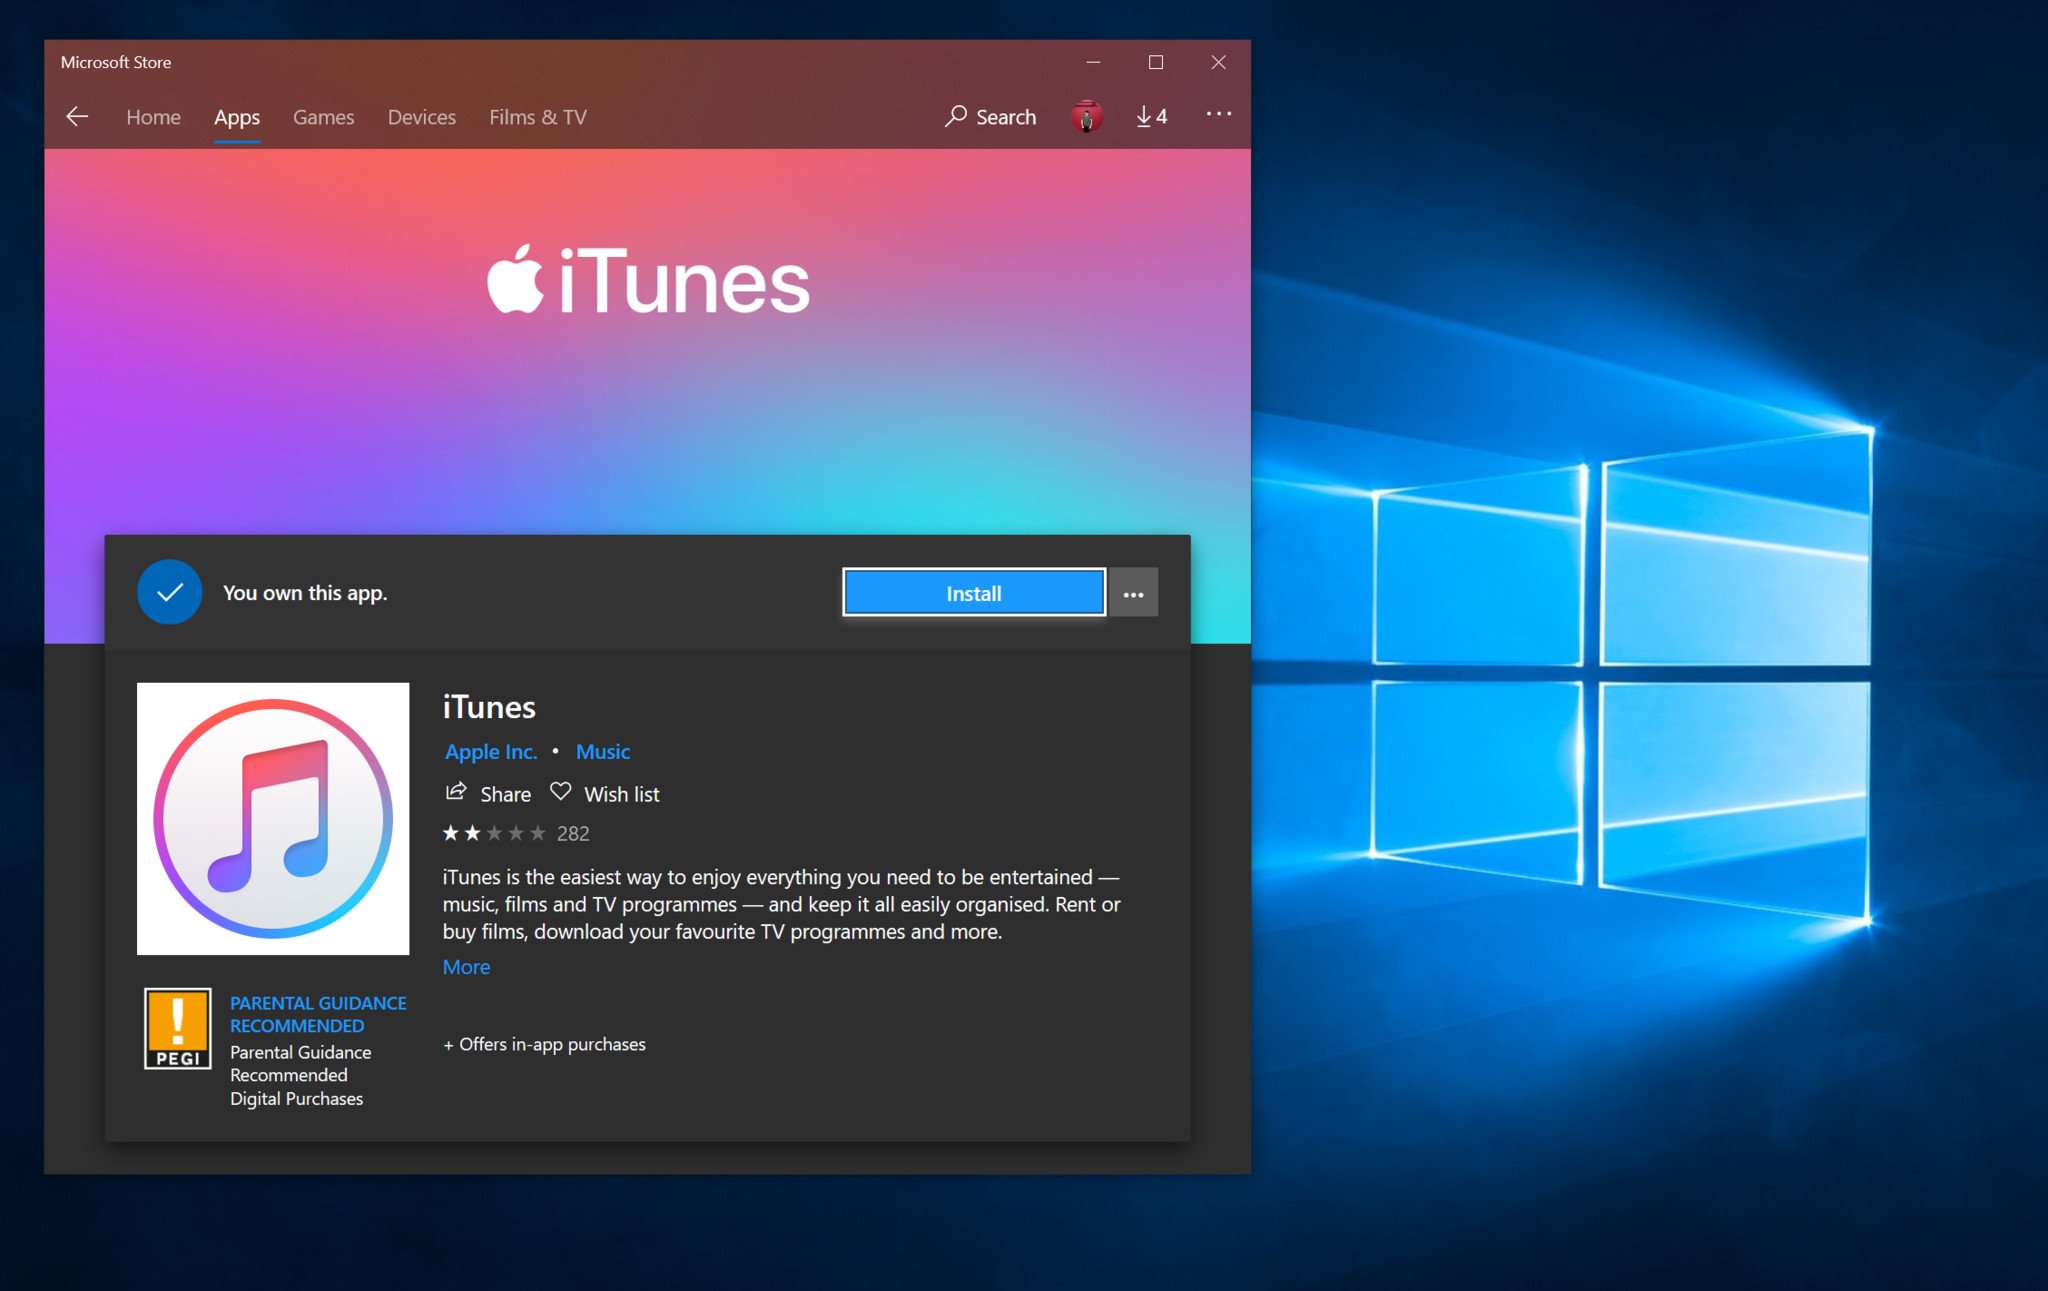 Download iTunes from the Windows 10 Microsoft Store.